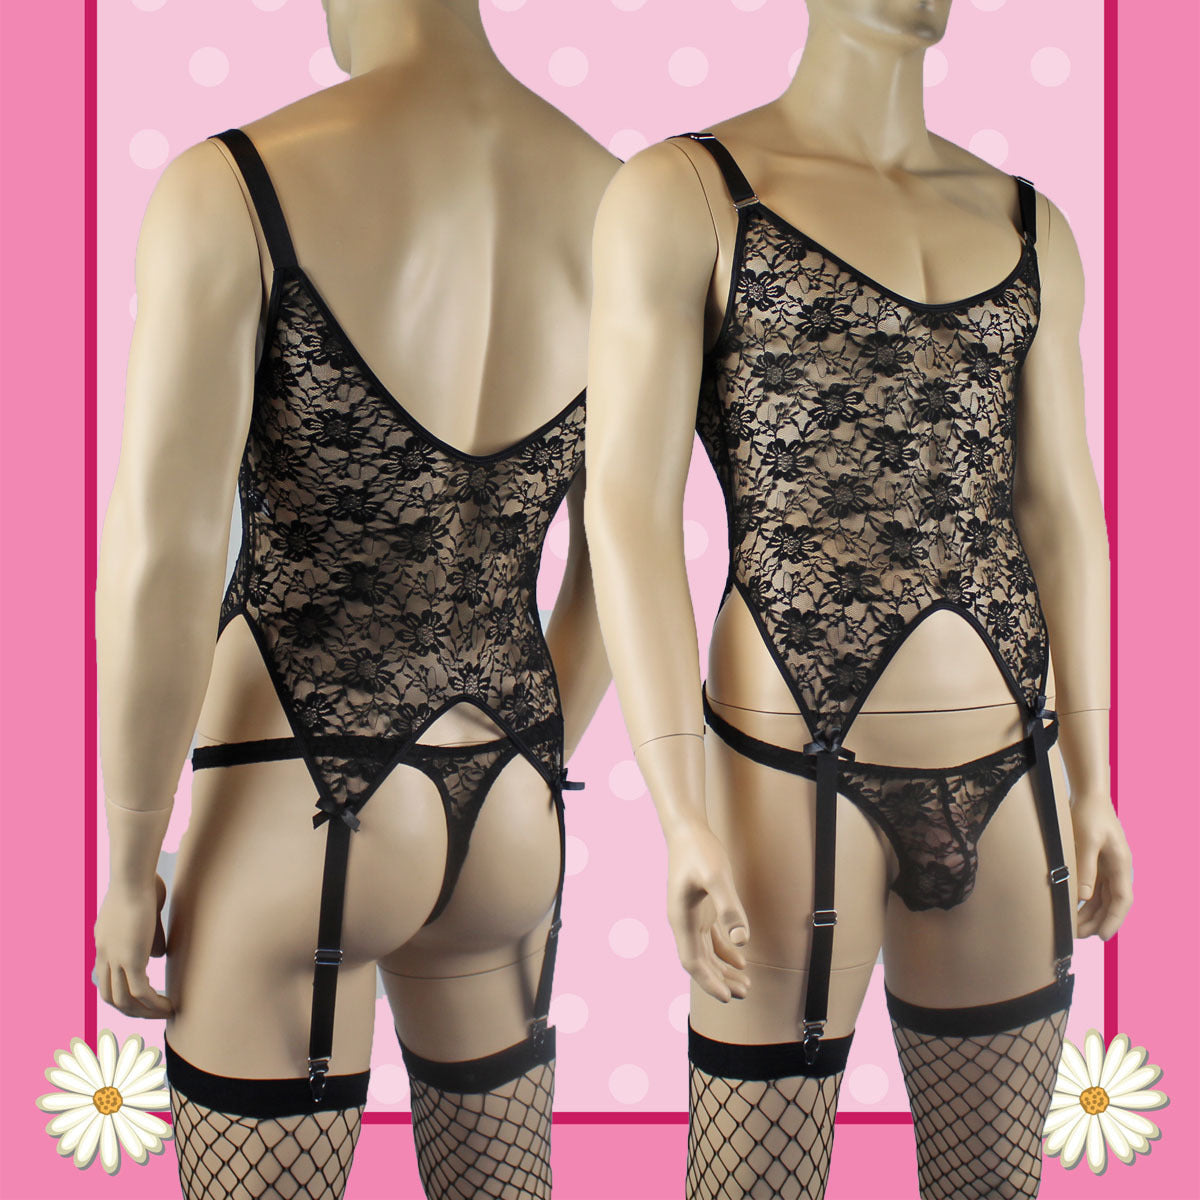 Fresh Drops: These Spangla Mens Lingerie Ensemble are an Intimate Delight